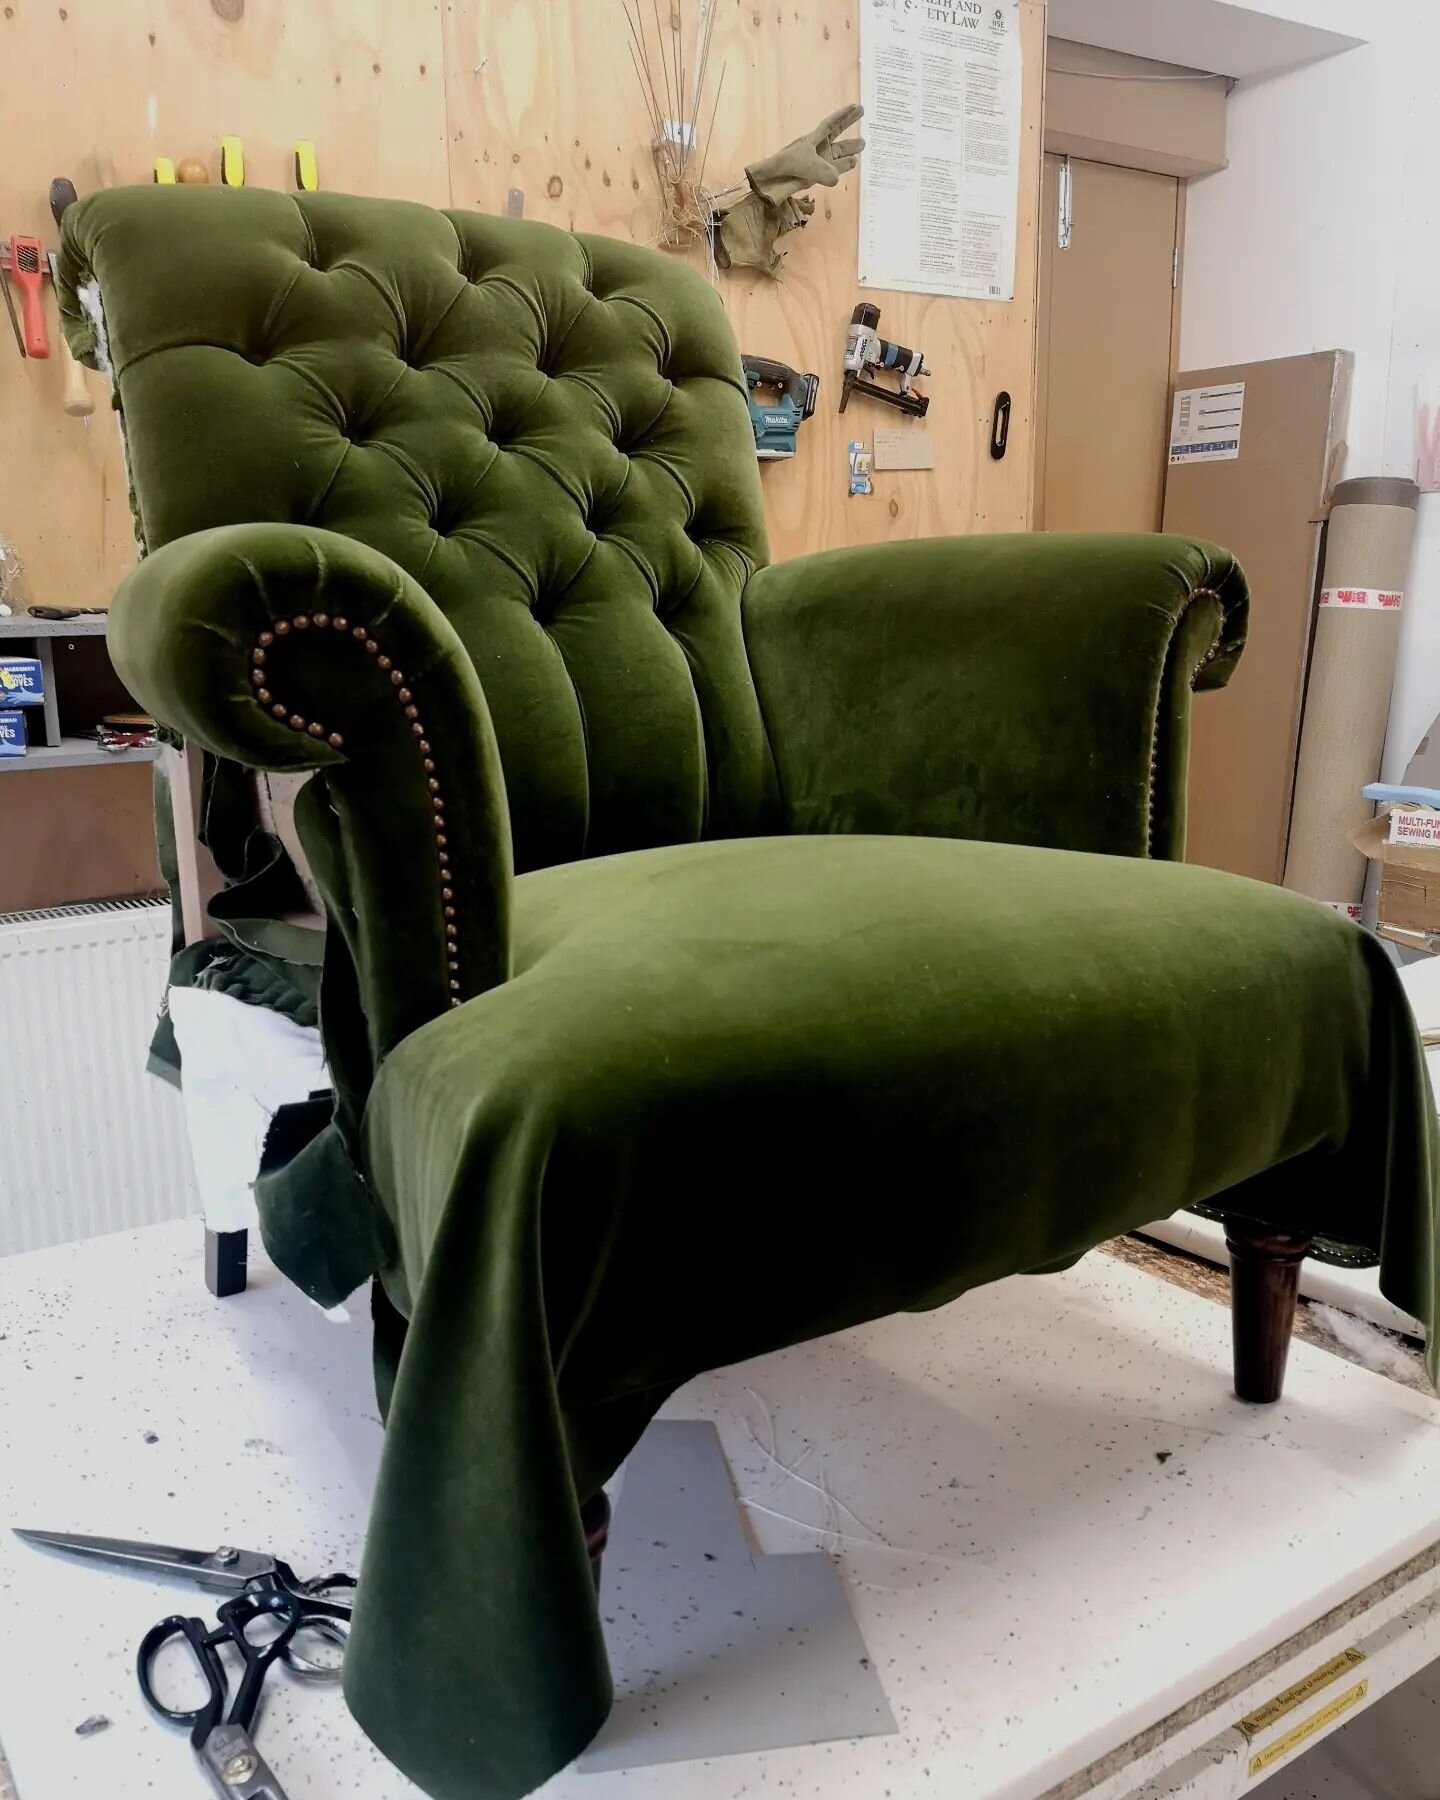 On the bench and made to order, the Be Seated Barony Armchair being upholstered in @designersguild Varese Velvet

#upholsterymanufacture
#scottishfurnituremakers
#upholsterersofinstagram
#upholsteryedinburgh